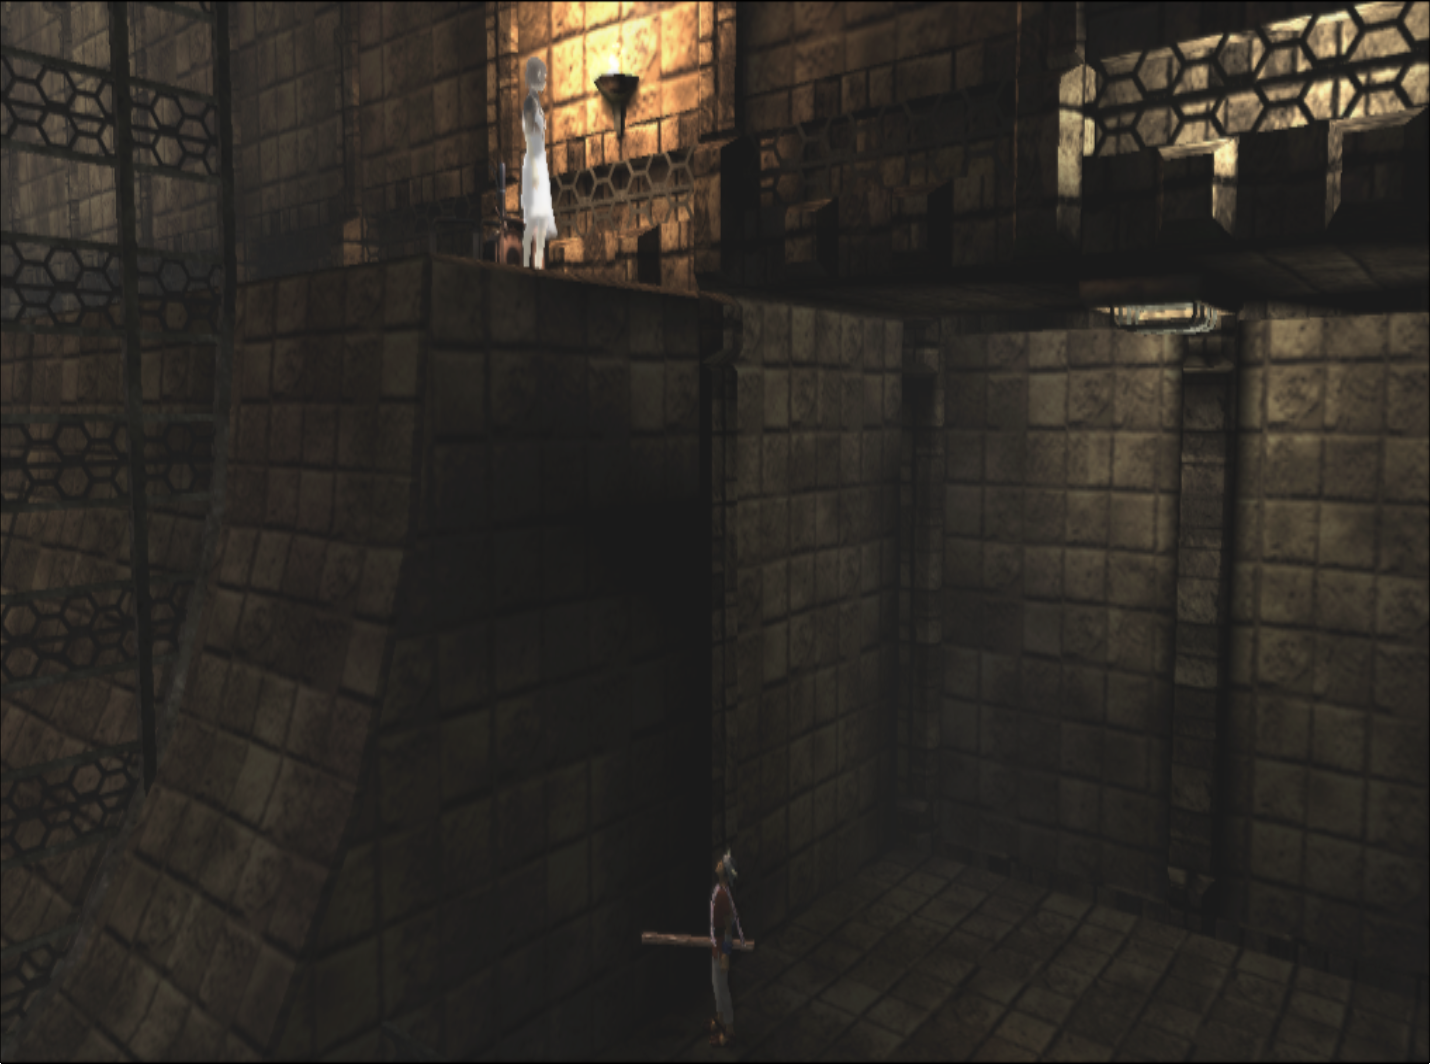 Image: In game screenshot of the high up lever to the entrance floor in the East Arena Stair Room, Yoruda stands tentatively over a drop about 3.5 times e-koʊ's height